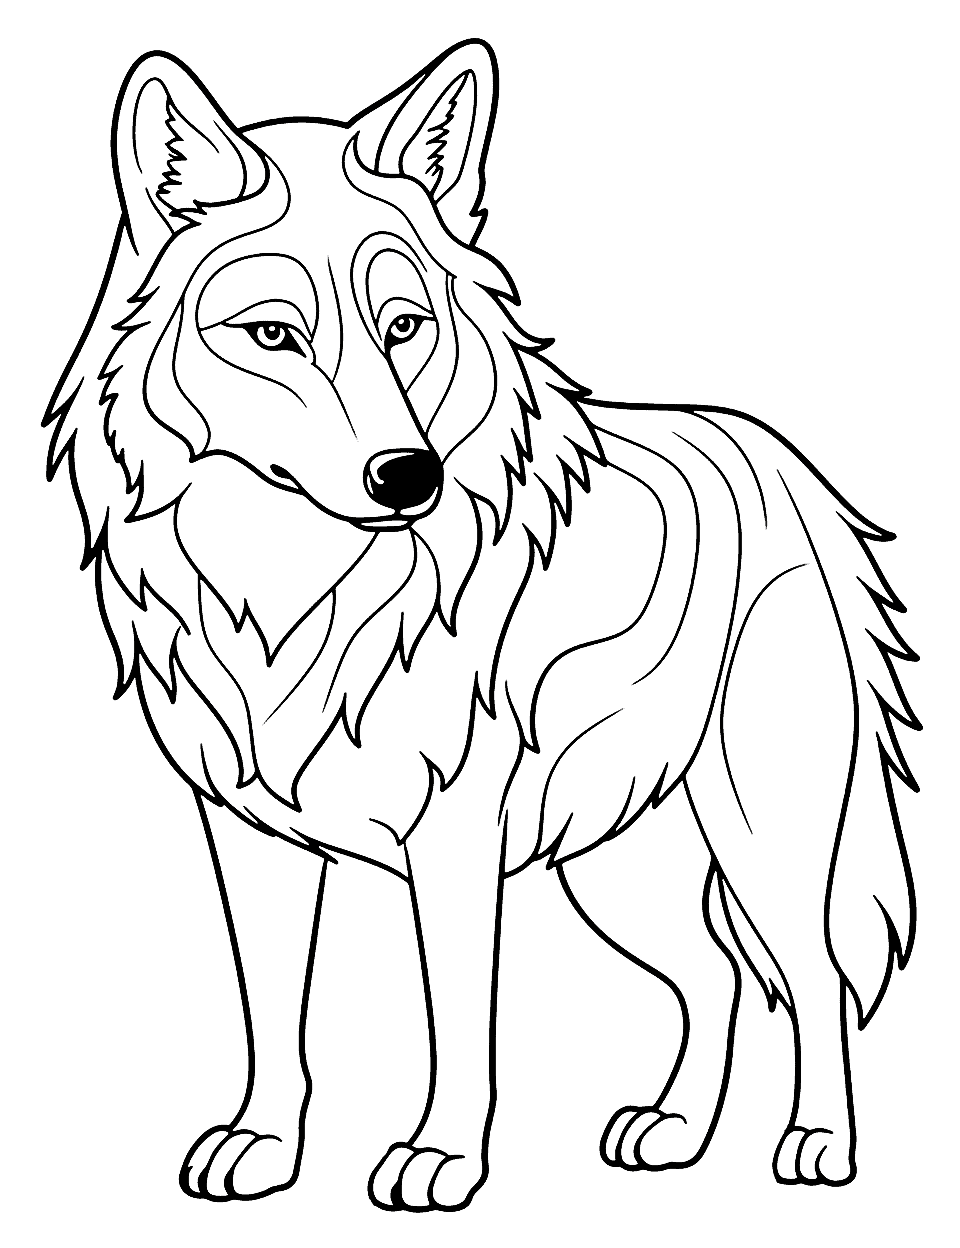 Wolf Clipart Coloring Page - A wolf drawn with simple lines and shapes.